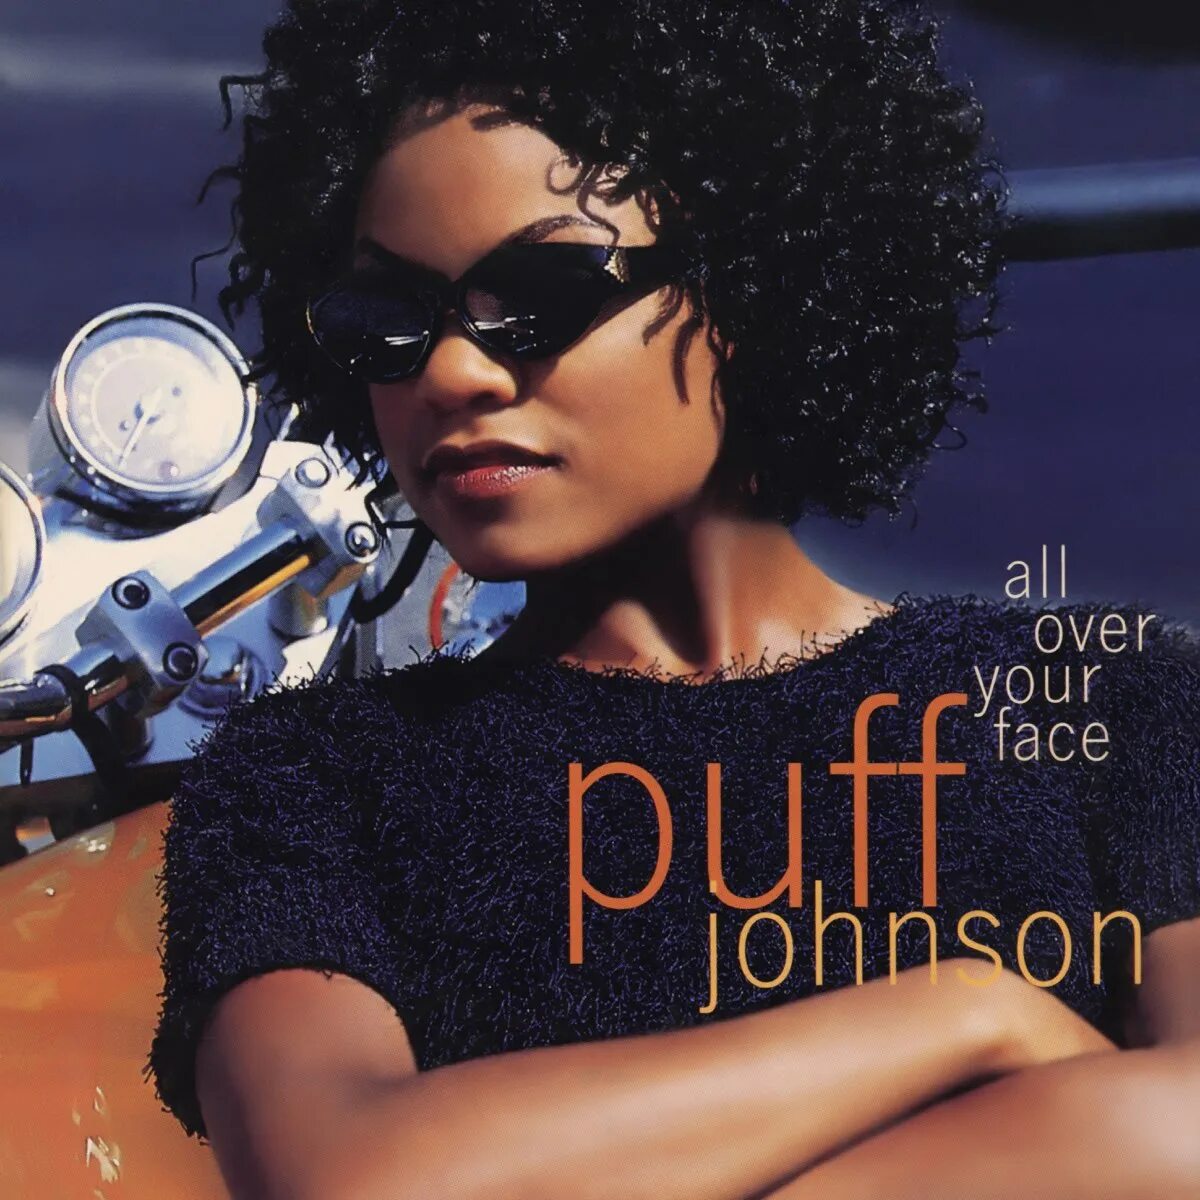 Puff Johnson. Puff музыка. All over your face. Обложки для mp3 фото Tamia - stranger in my House. Песня do your